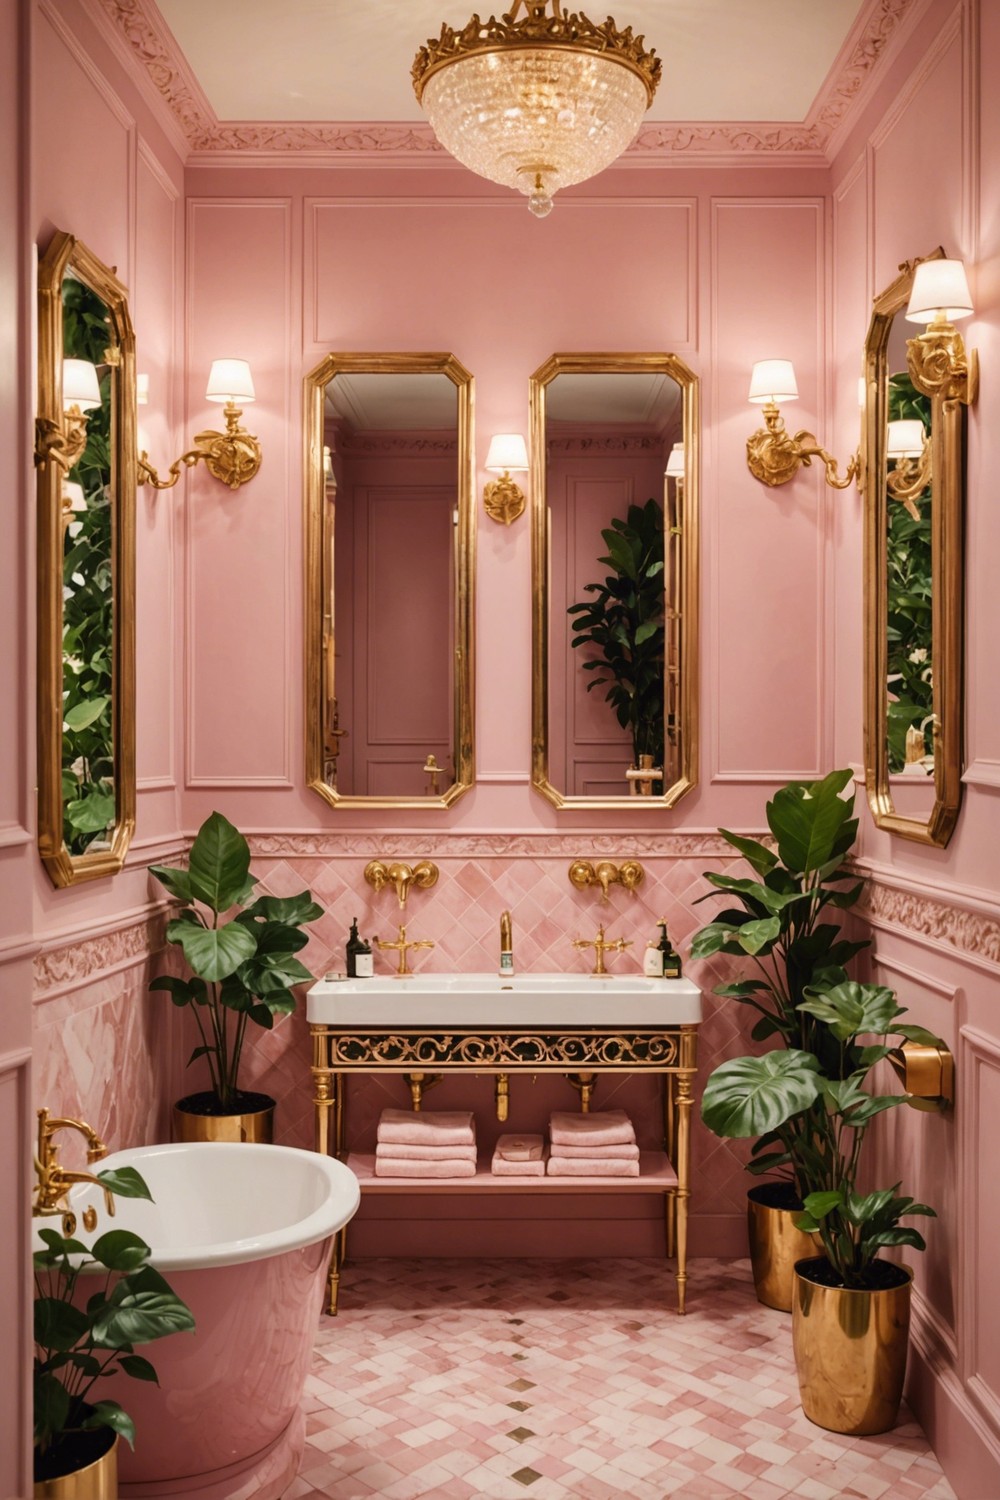 Vintage Chic: Pink Bathroom Decor with Gold Accents